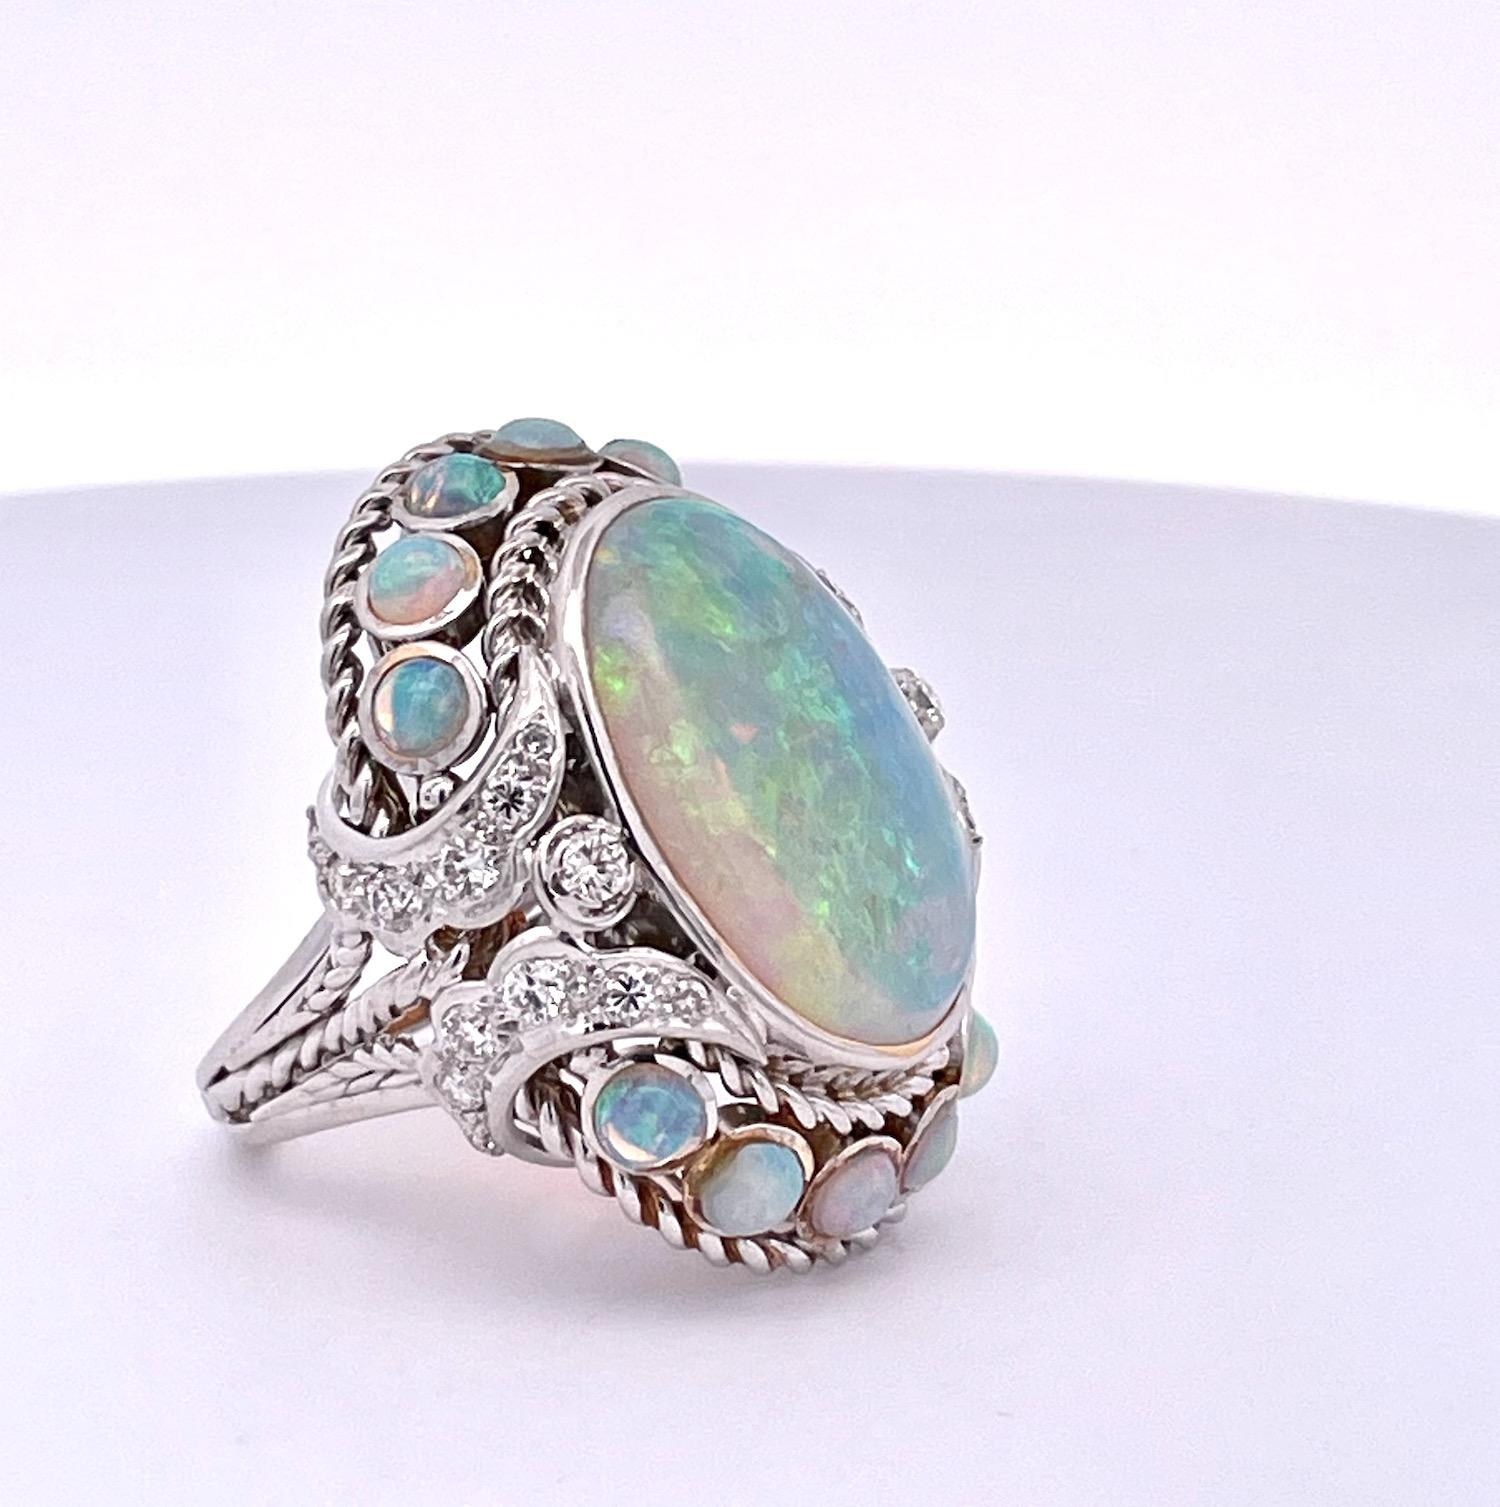 Large Opal Diamond Ring 18K 6.75 In Good Condition For Sale In North Hollywood, CA